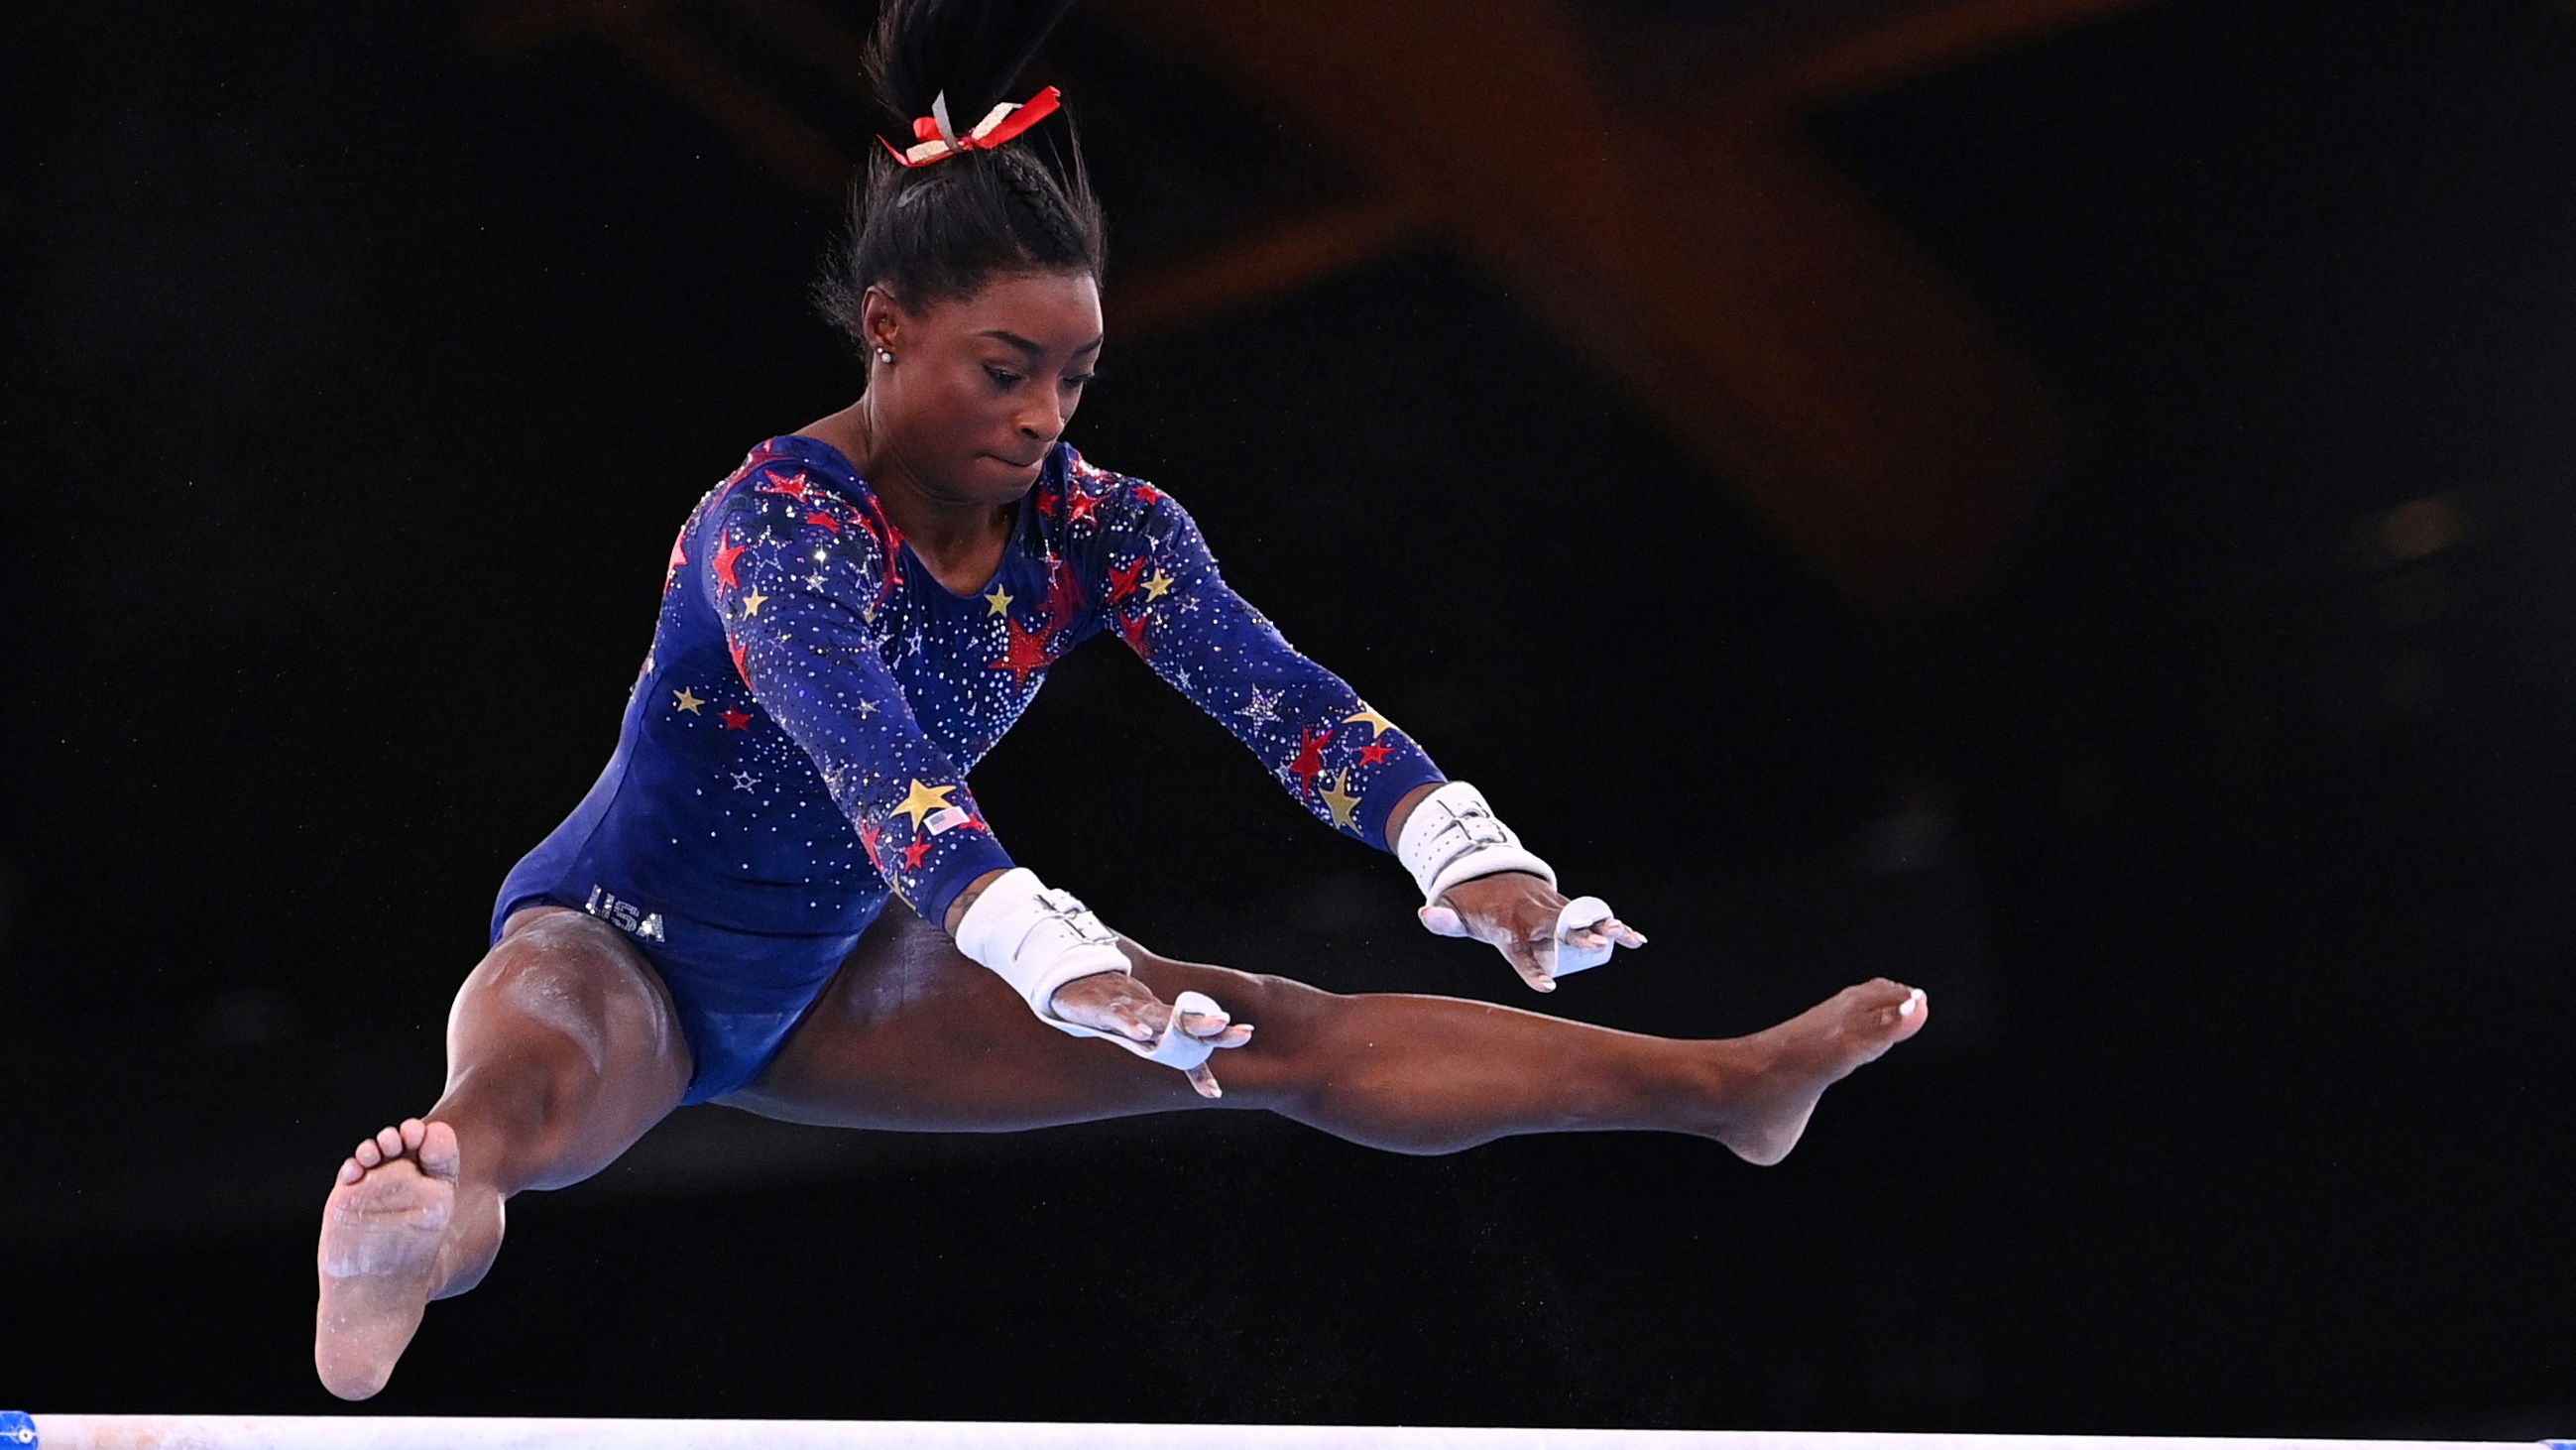 Biles remains on track for six golds at Tokyo Games